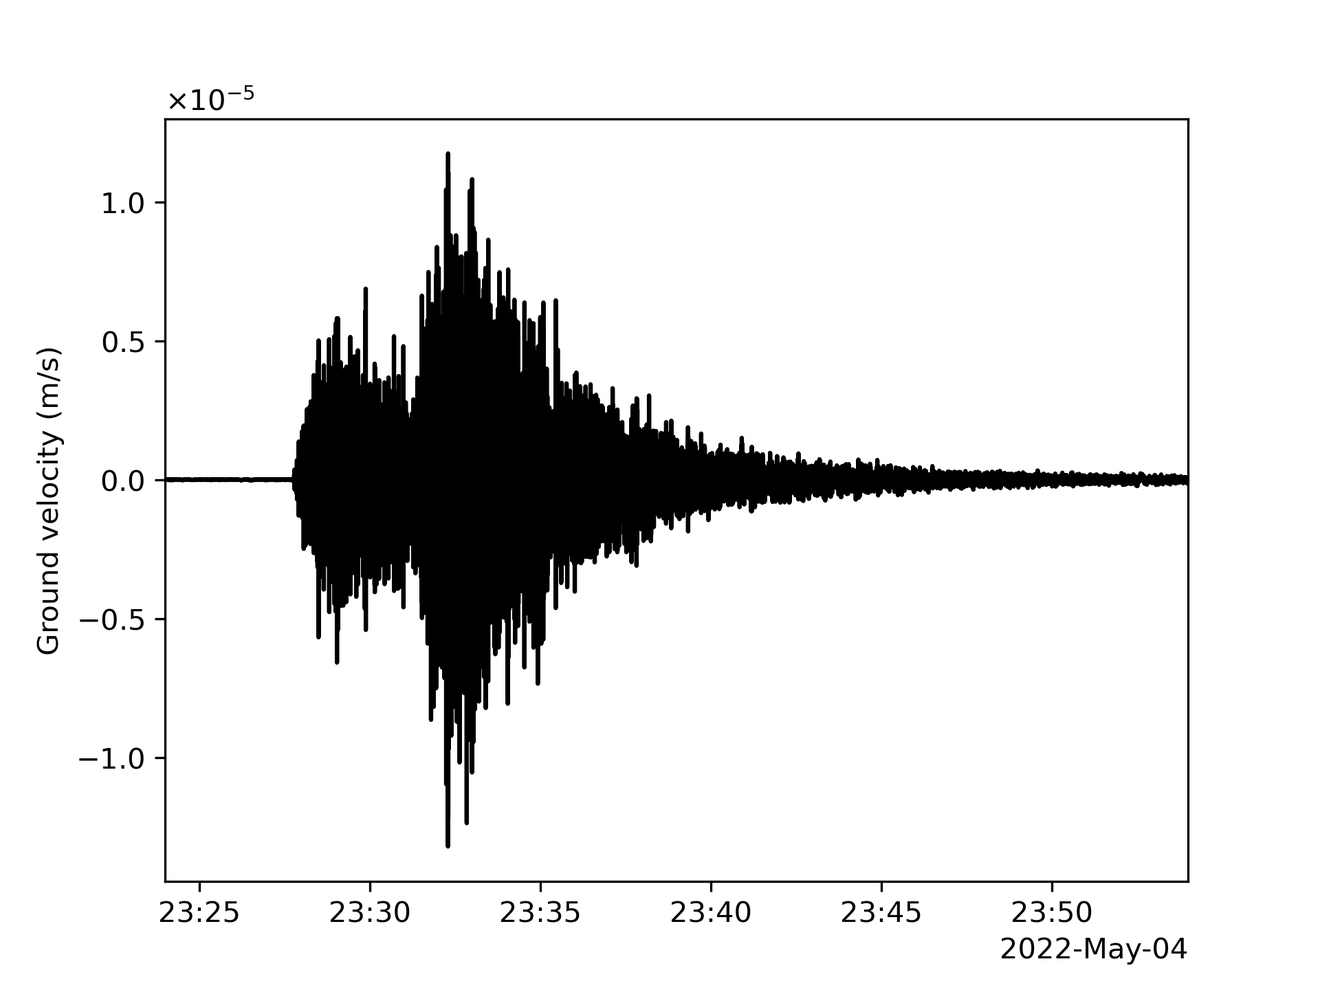 The graph shos that about 23:25 UTC the quake started increasing its speed after several minutes before slowly reducing its intensity over tens of minutes. The graph cuts off at midnight and the reverberations are ongoing but tiny